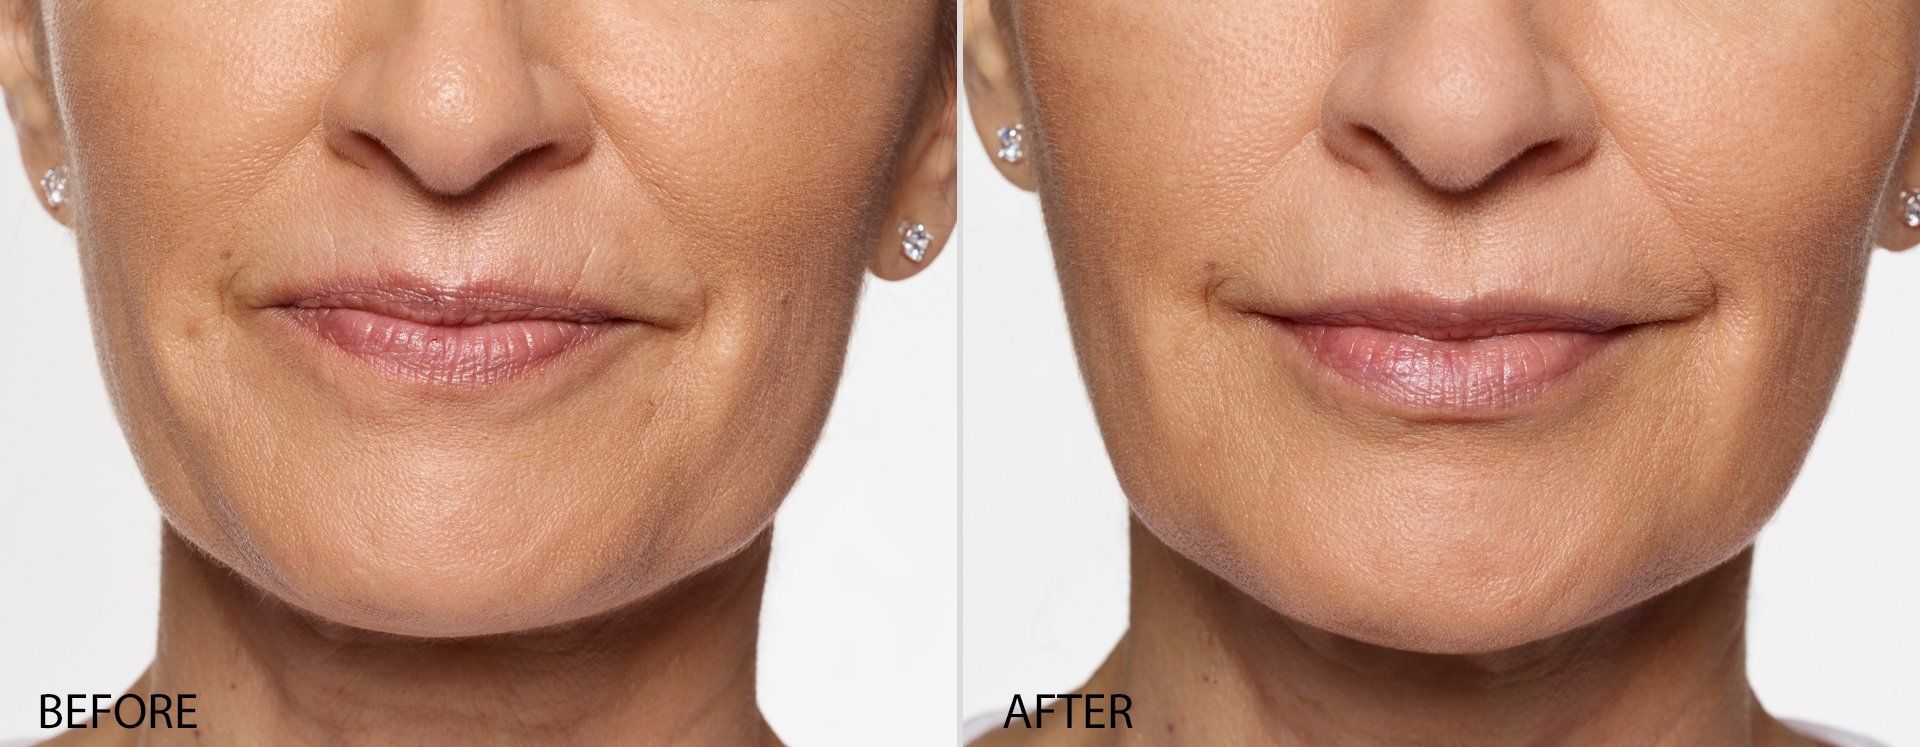  Before and after Dermal Fillers Photo